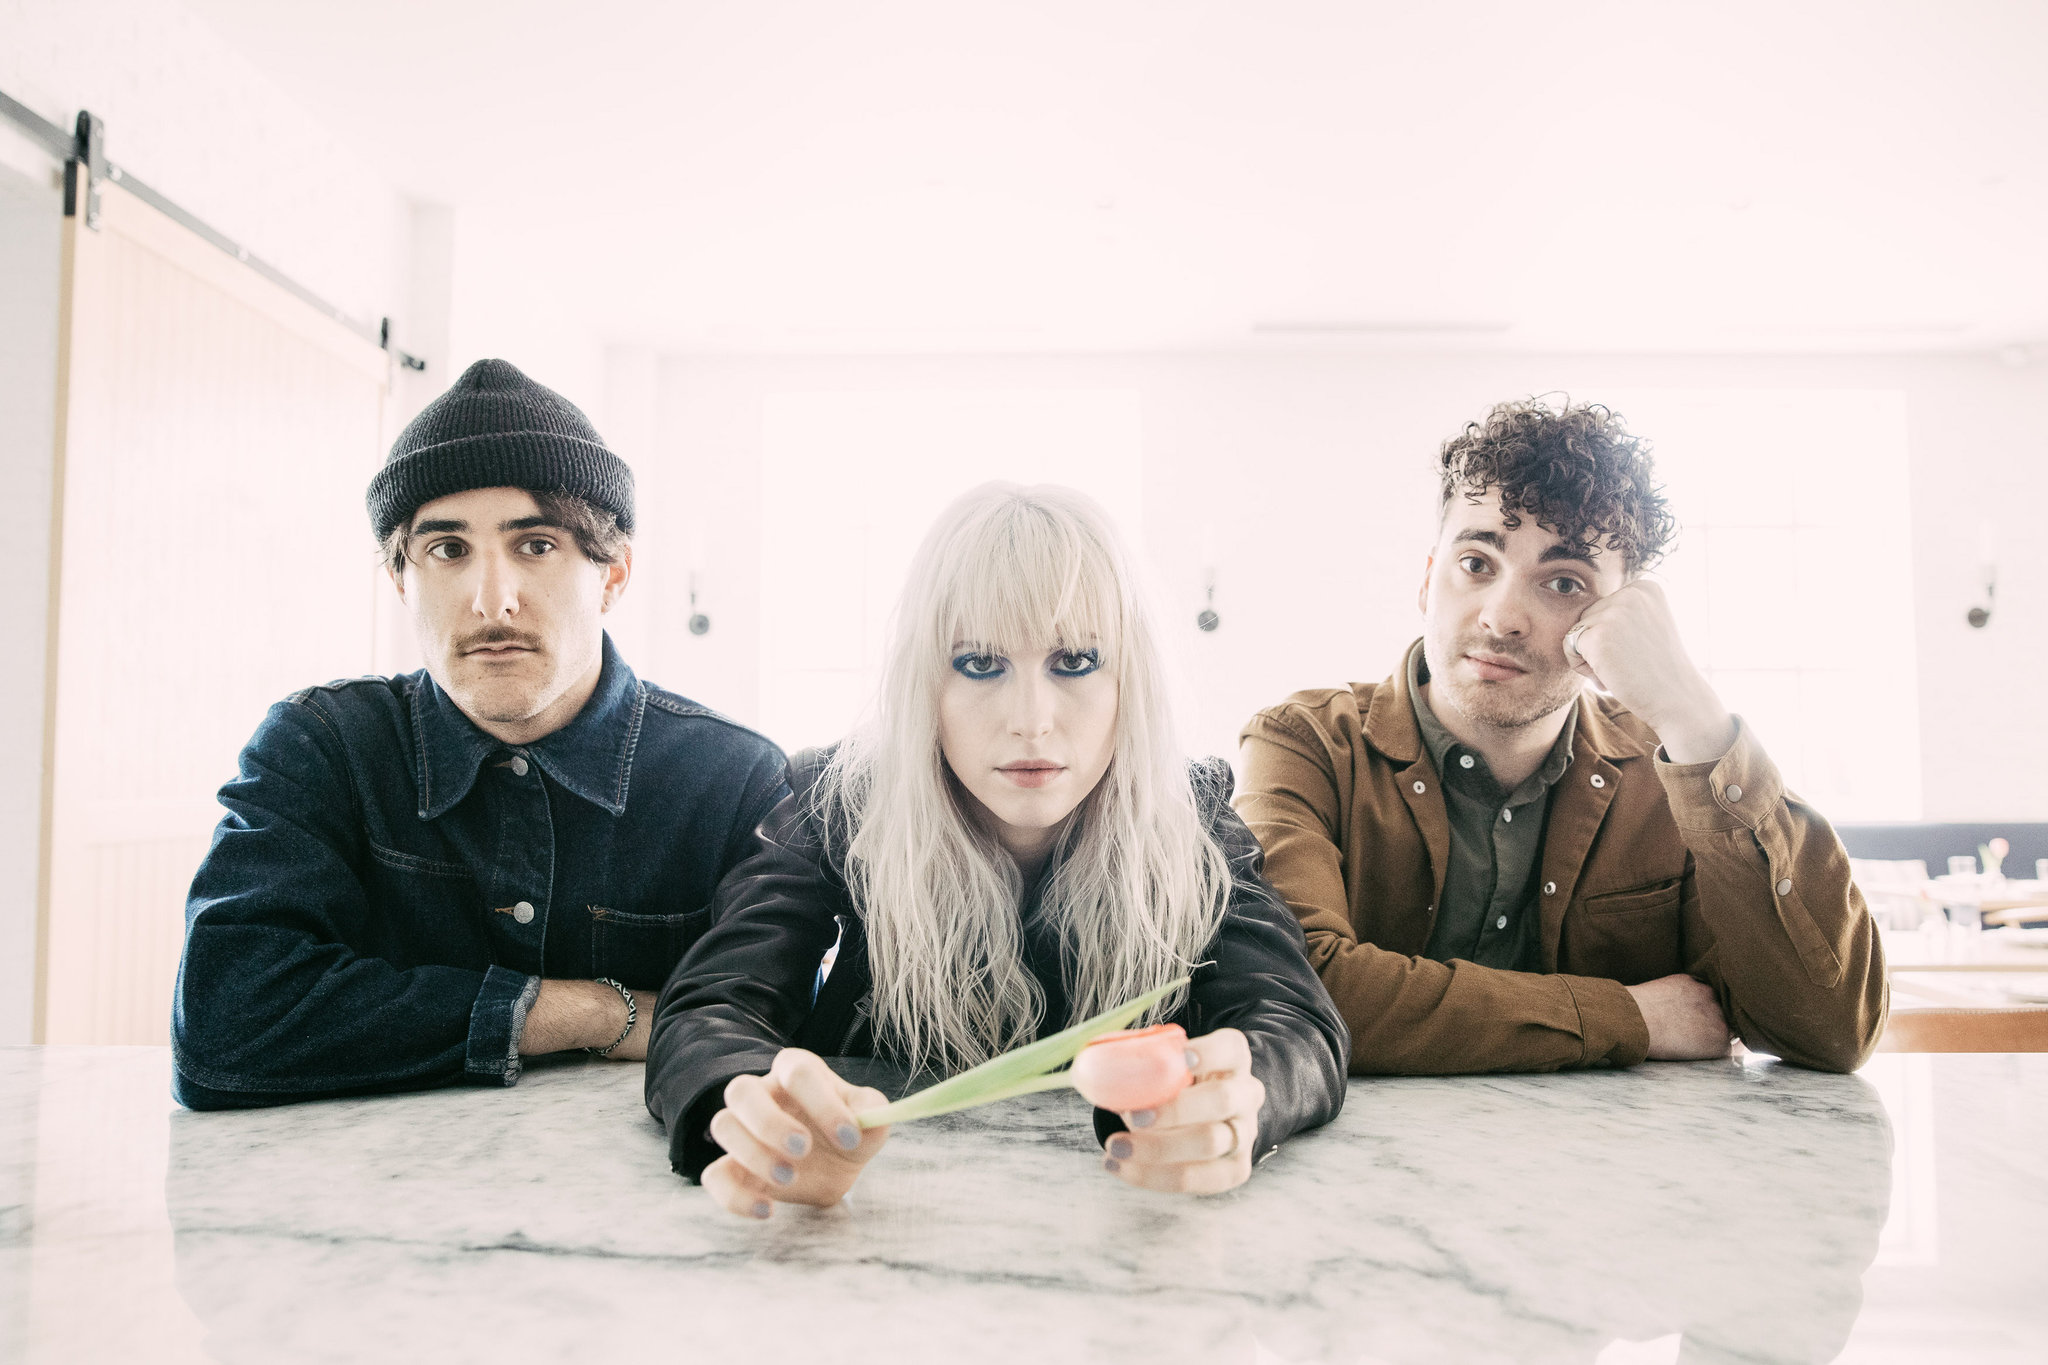 Paramore announce new album ‘After Laughter’, UK/European tour & new video for ‘Hard Times’